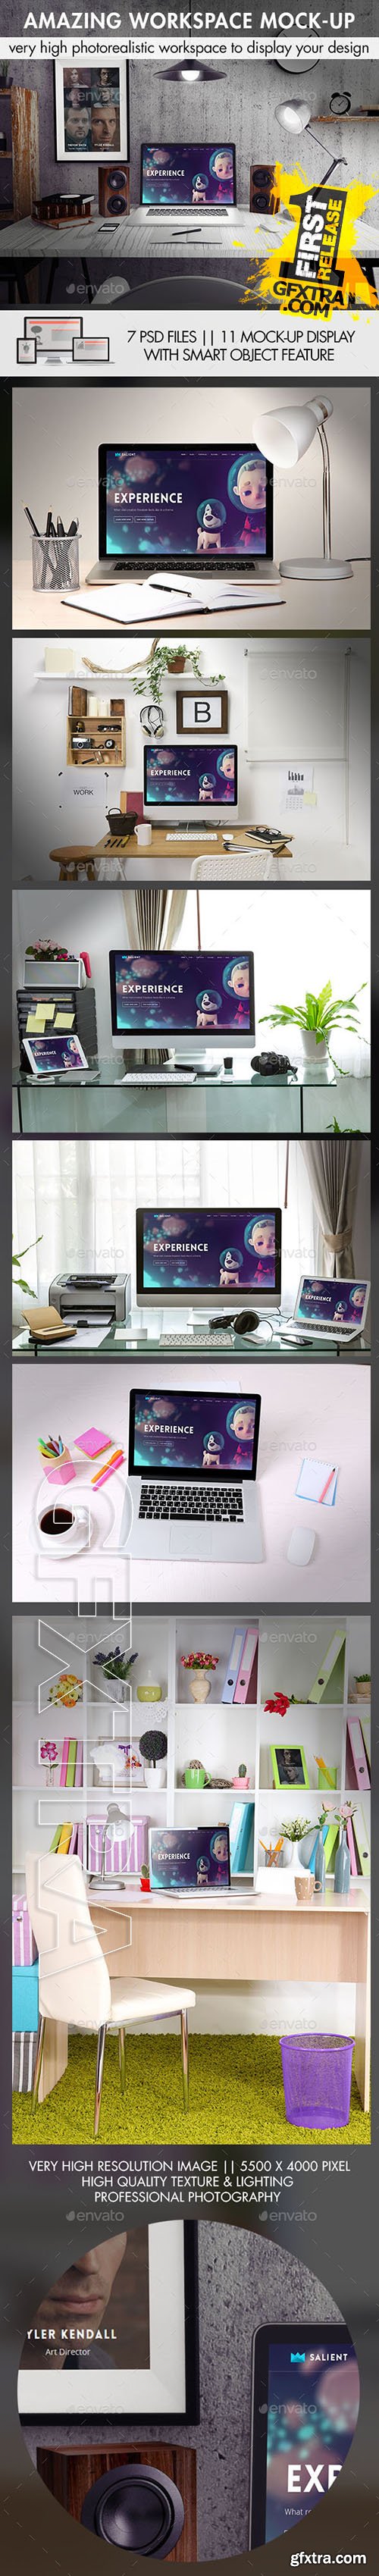 Graphicriver - Amazing Workspace Mock-Up 8832052